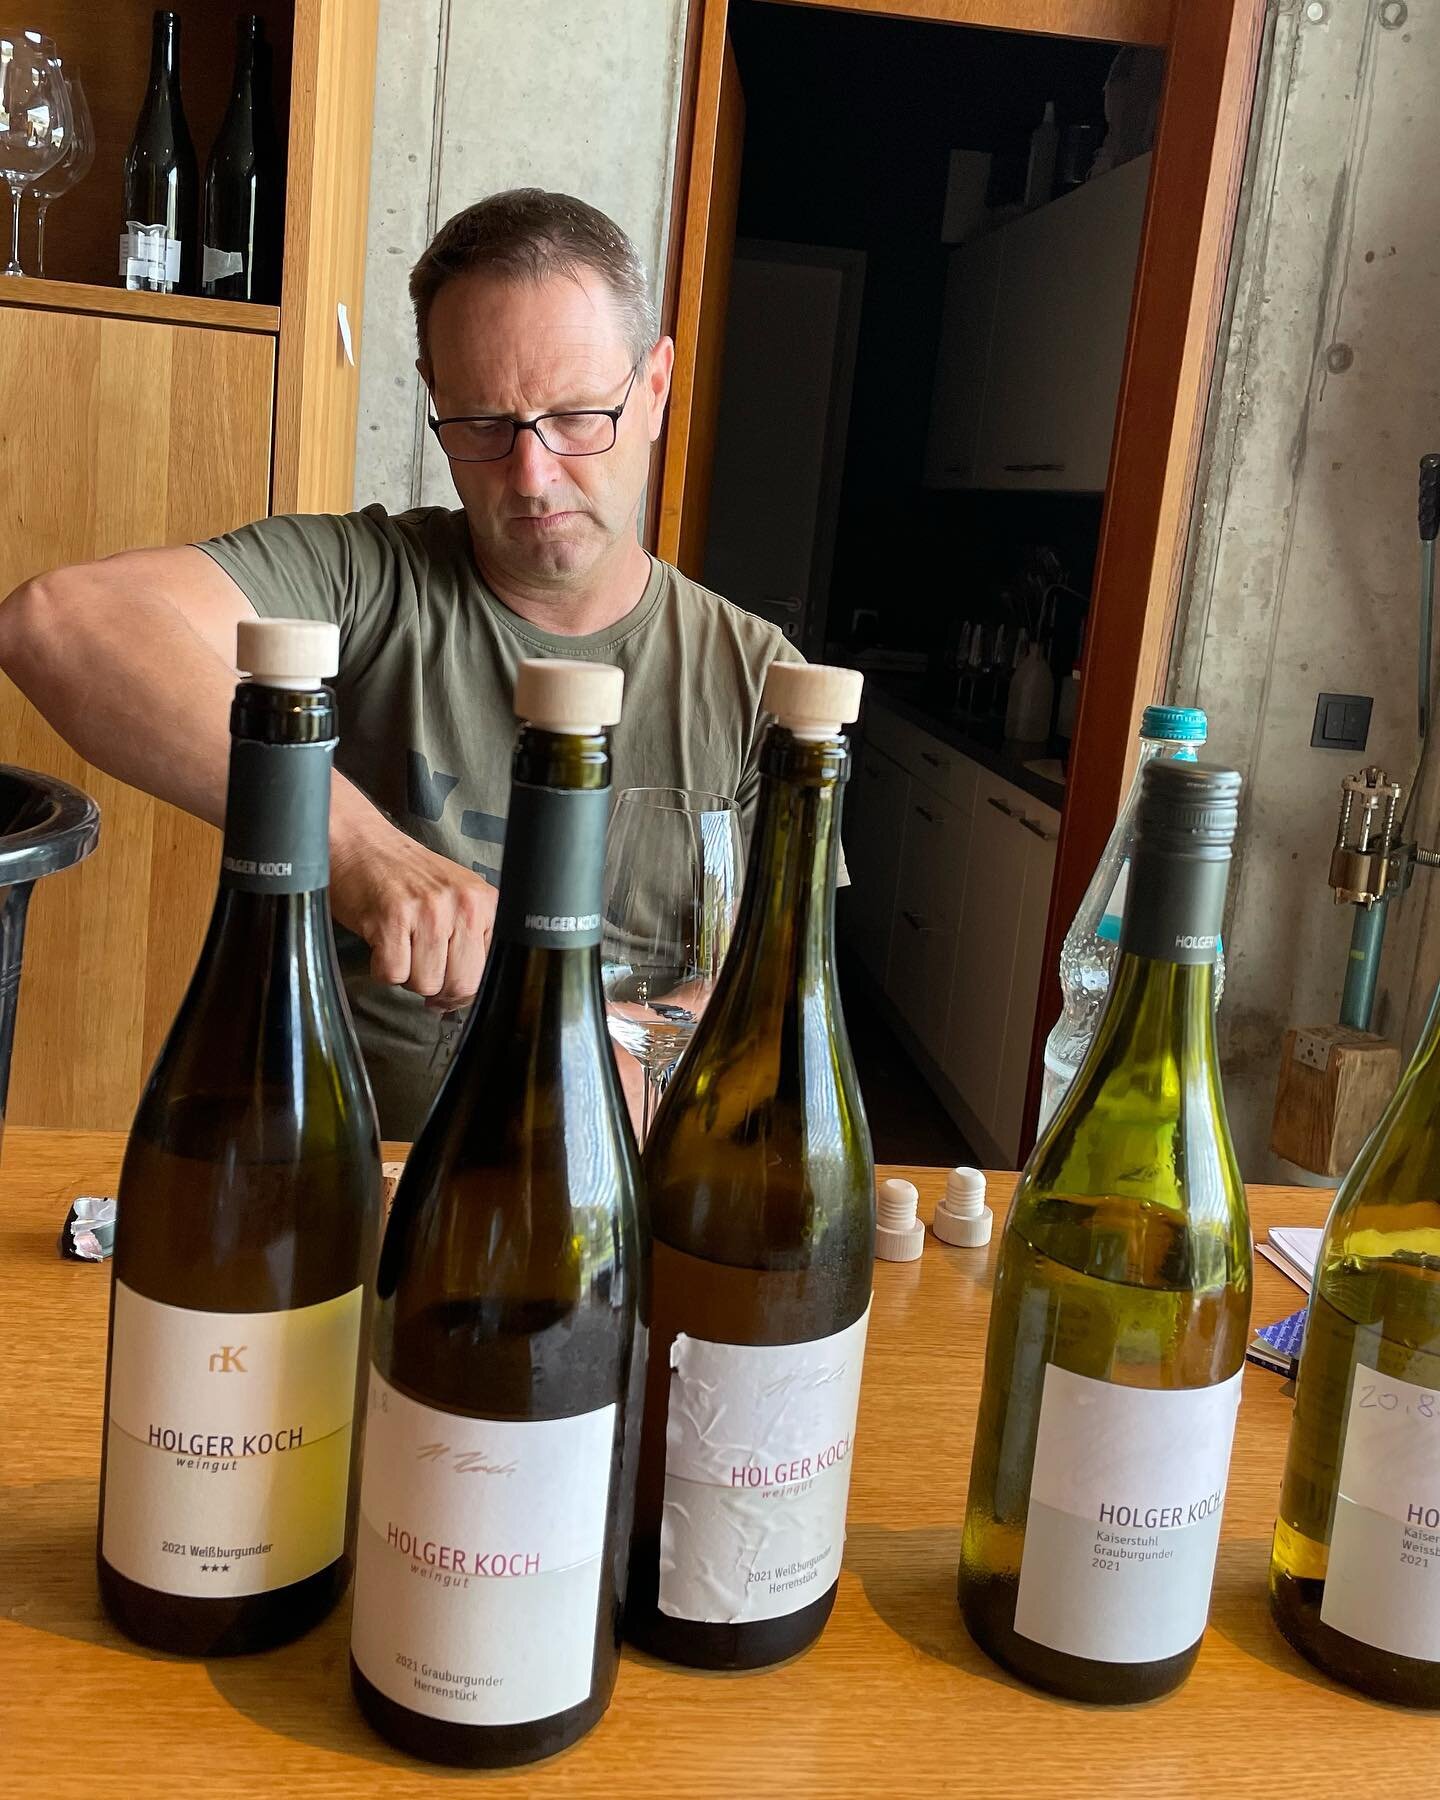 Into every family vacation, a little wine research must fall.

How could I be just a few winding roads and one Autobahn stretch away from Holger Koch's dazzling Pinots and Chards and not make the detour?

To my delight, he packed our impromptu visit 